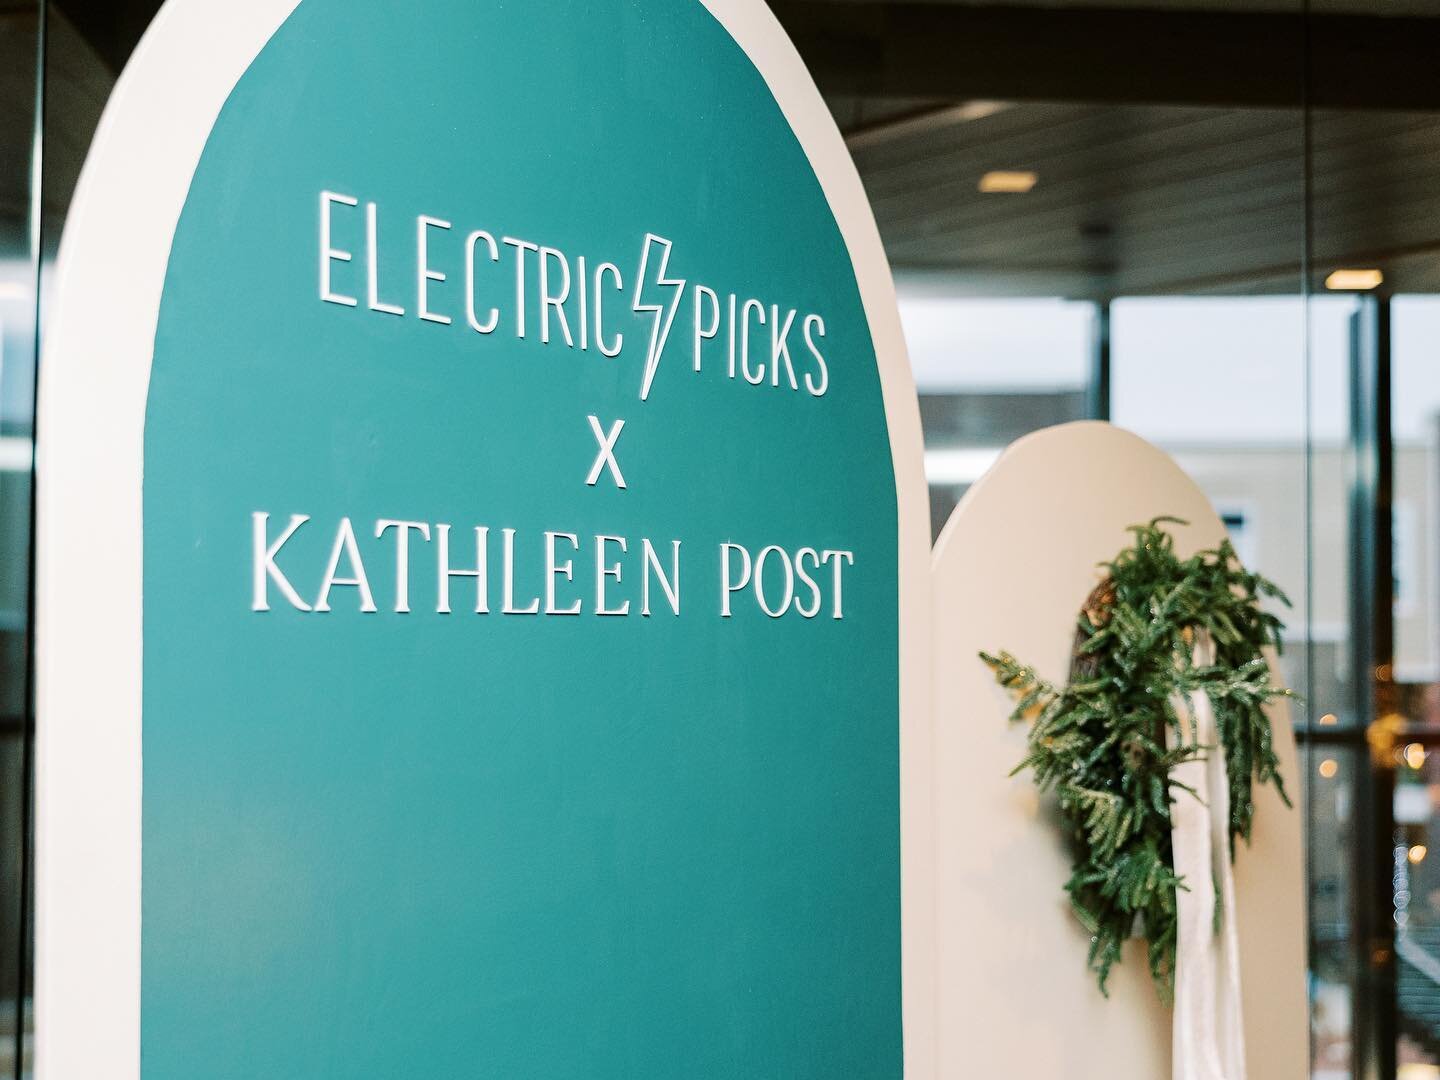 It doesn&rsquo;t get more magical than this launch event for @electricpicks x @kathleen.post coordinated by @partylittlethings! These backdrops (esp with the acrylic logo) may be our top new fav! 🤍 
.
Backdrops / Acrylic logo: @elderflower_design 
S